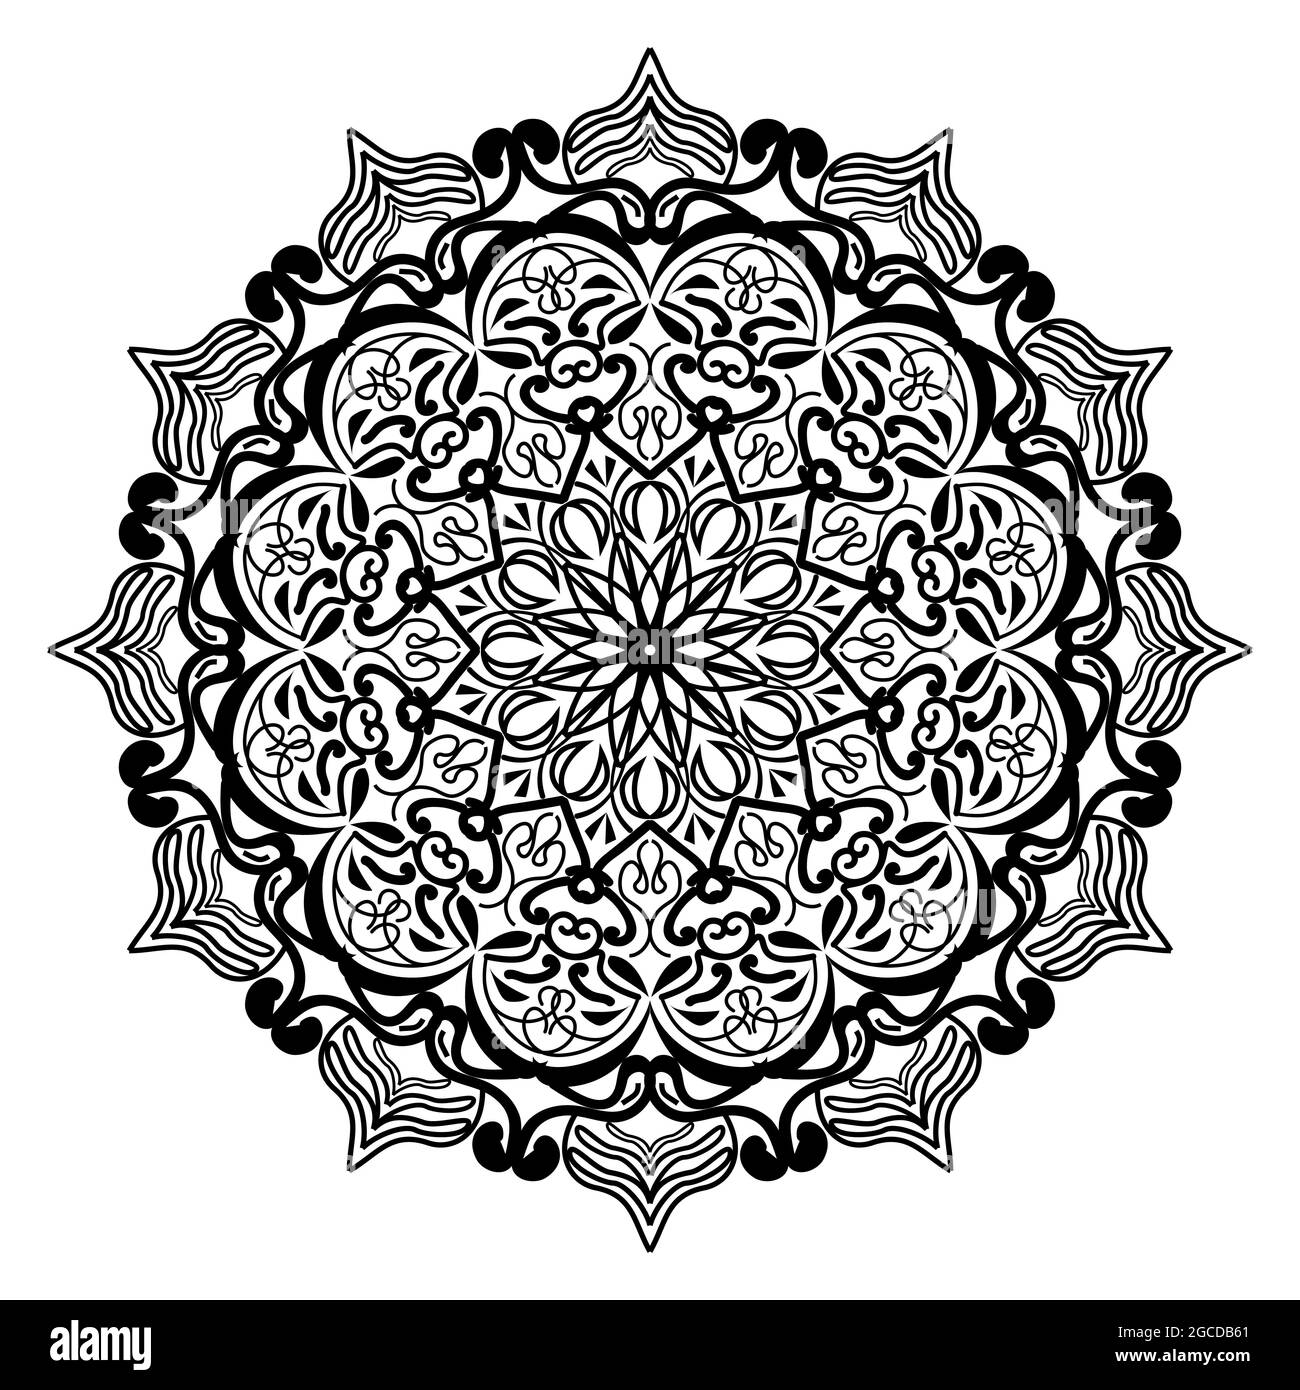 relaxing floral mandala background and arabesque traditional line art design Stock Vector